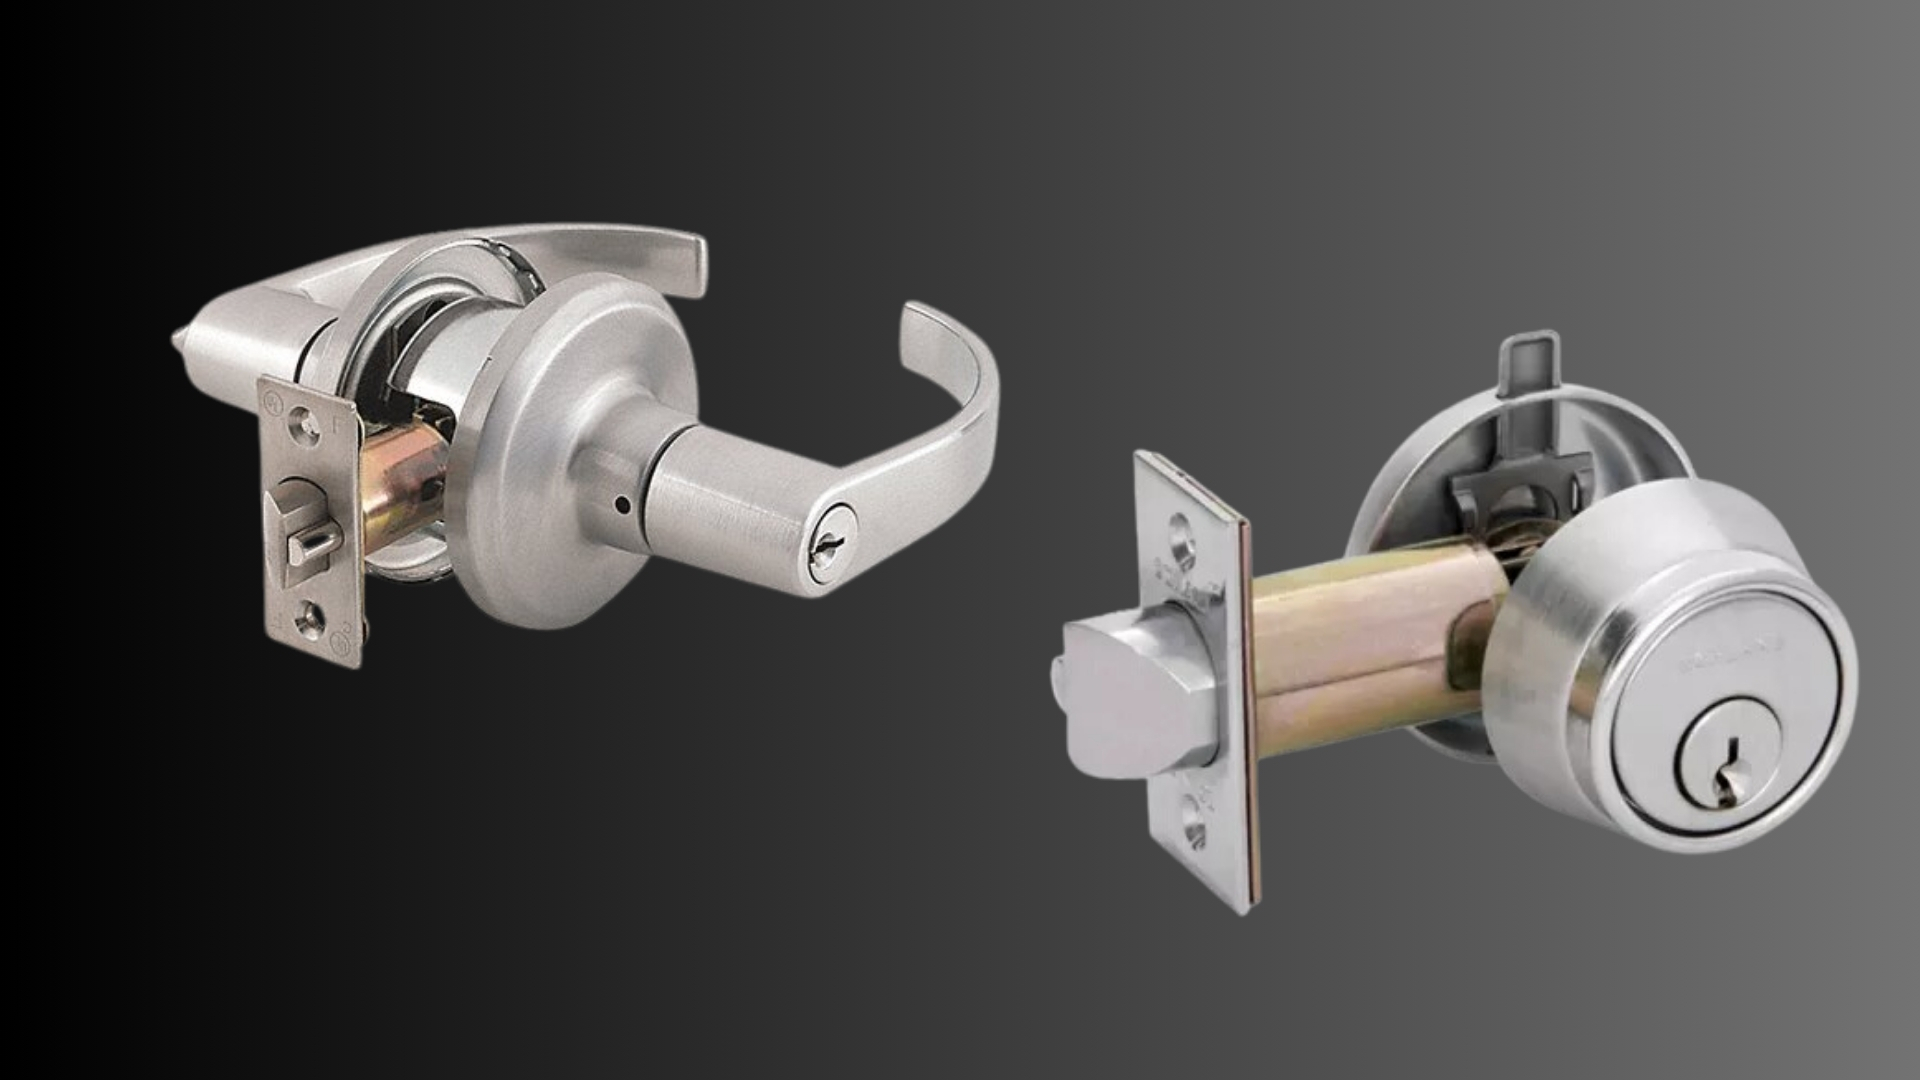 Two types of deadlatches for office and retail store security, showcasing their robust mechanisms and keys.